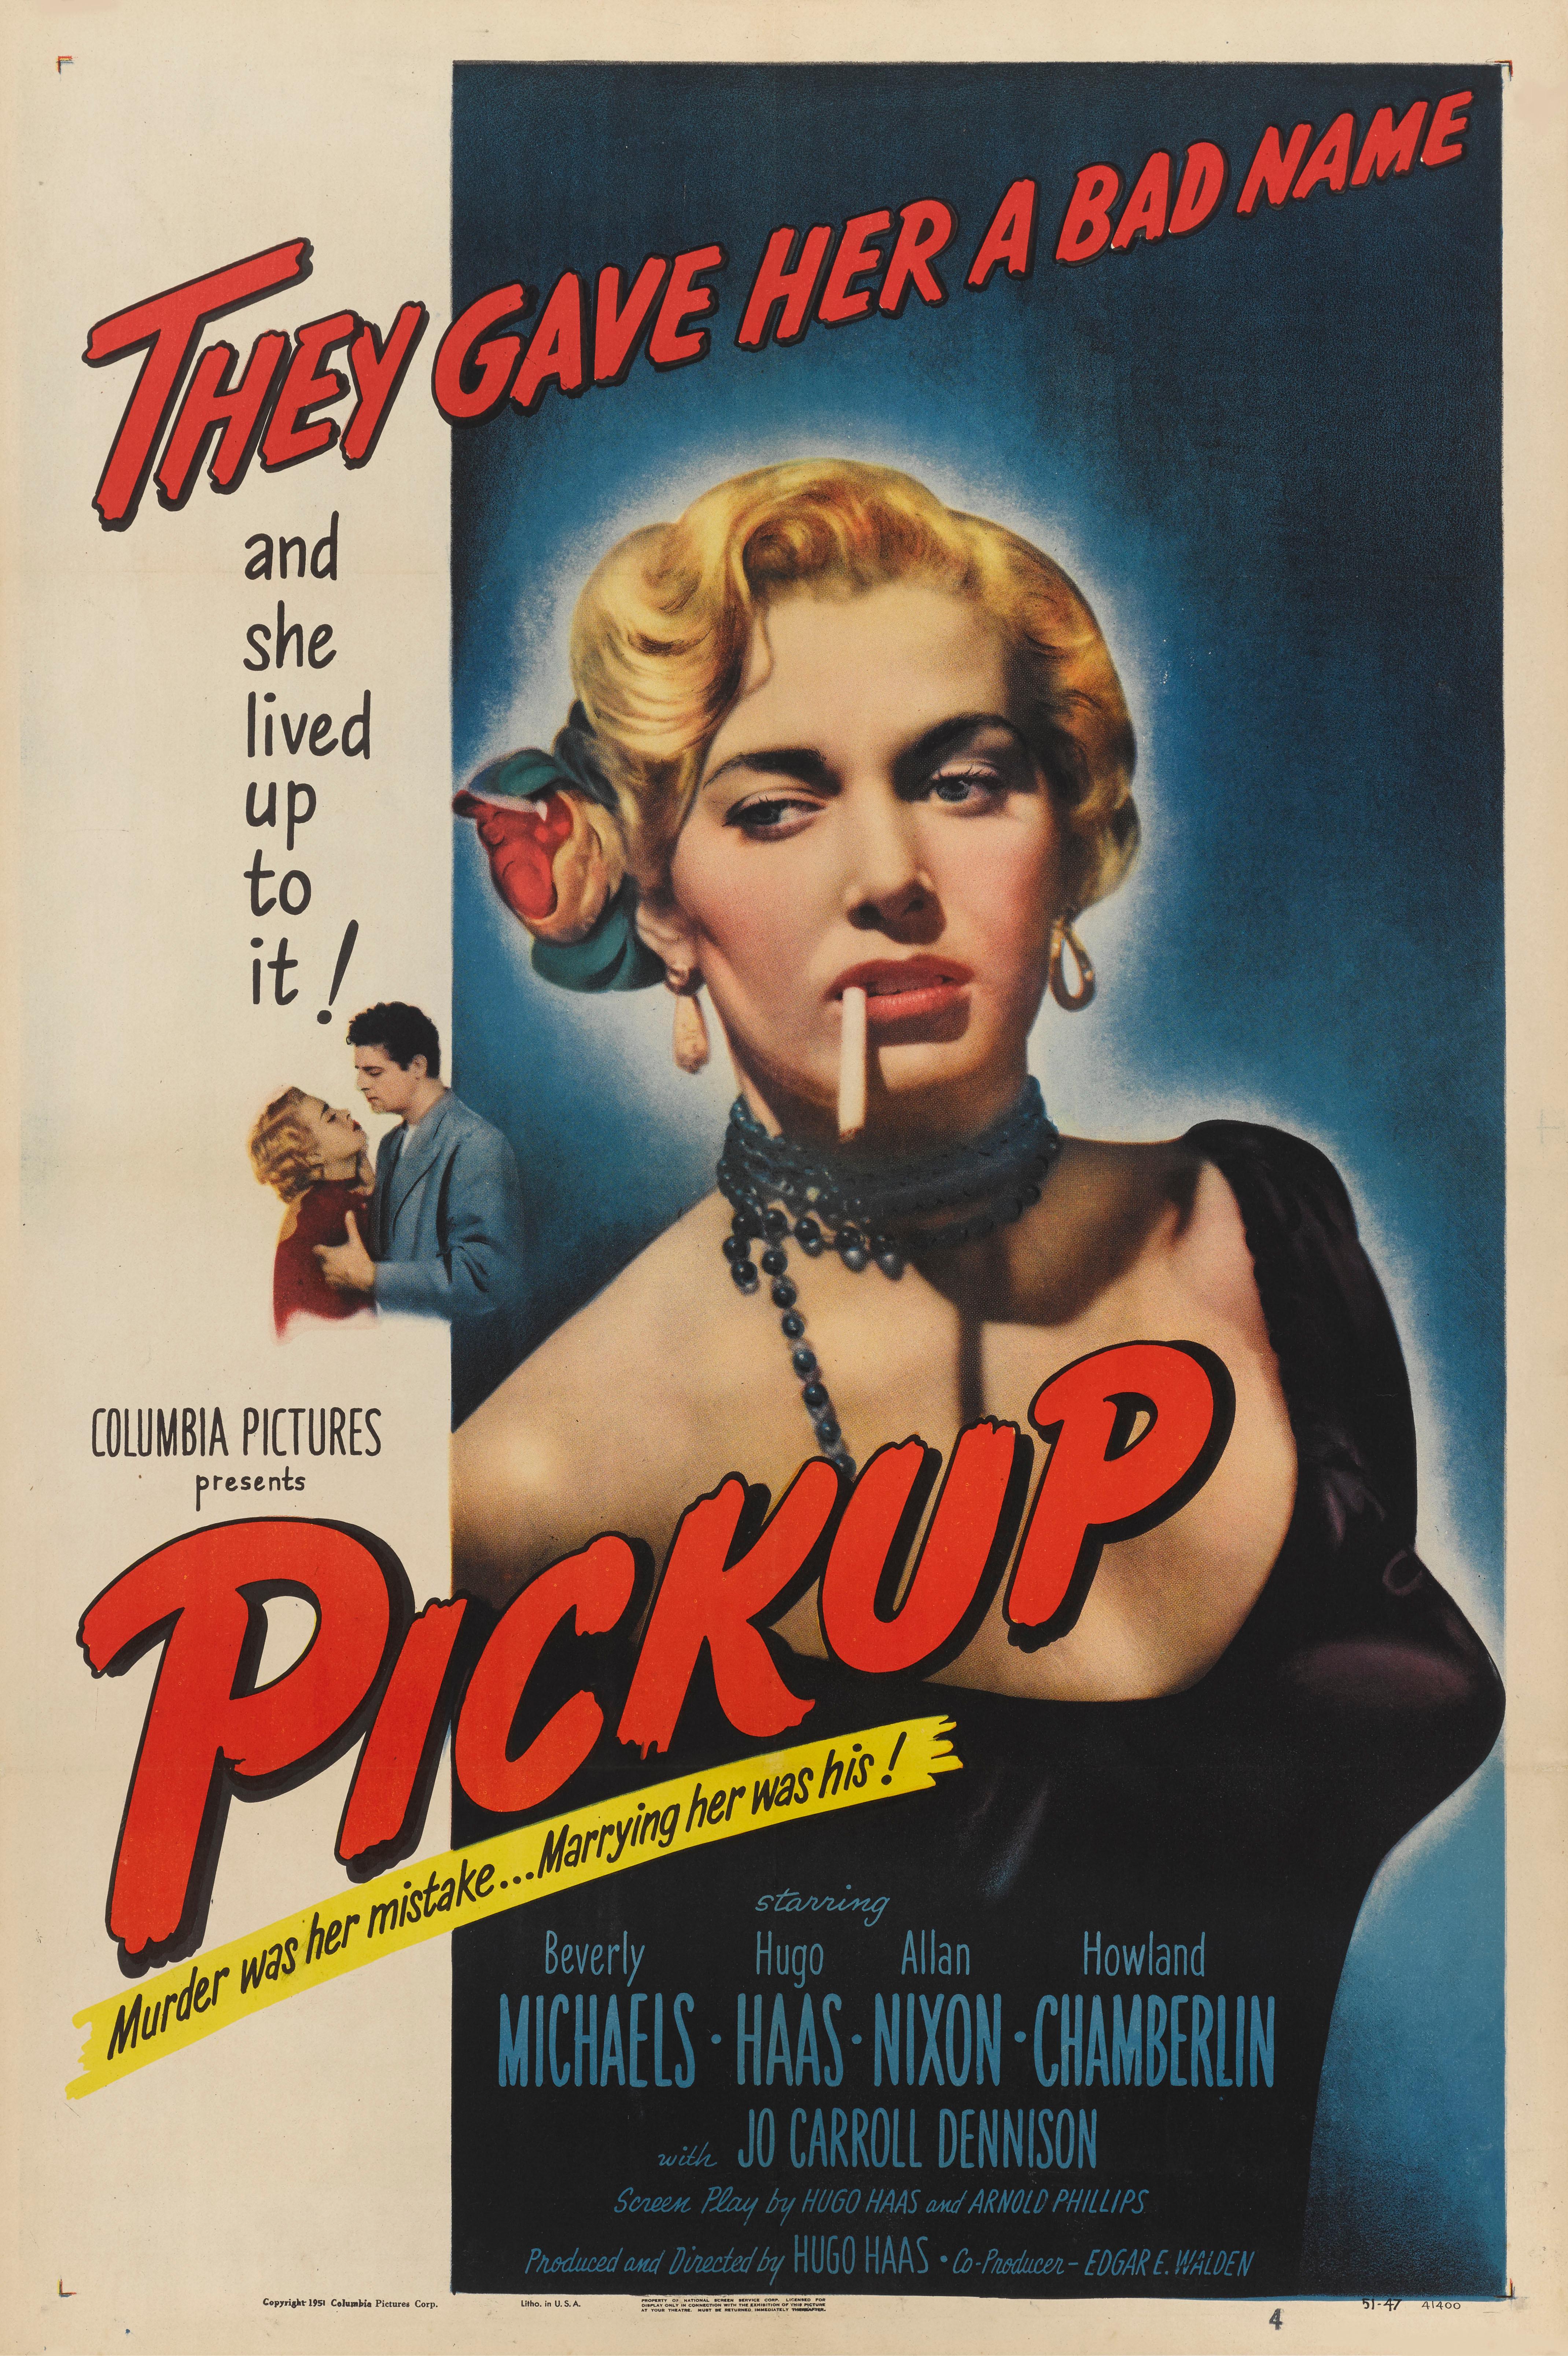 Original US film poster from the 1951 film Pickup. Hugo Haas (1901-1968) was an acknowledged master of bad girl films. He was born in Czechoslovakia, where he was an actor before fleeing to America during the Nazi invasion. He began working as an